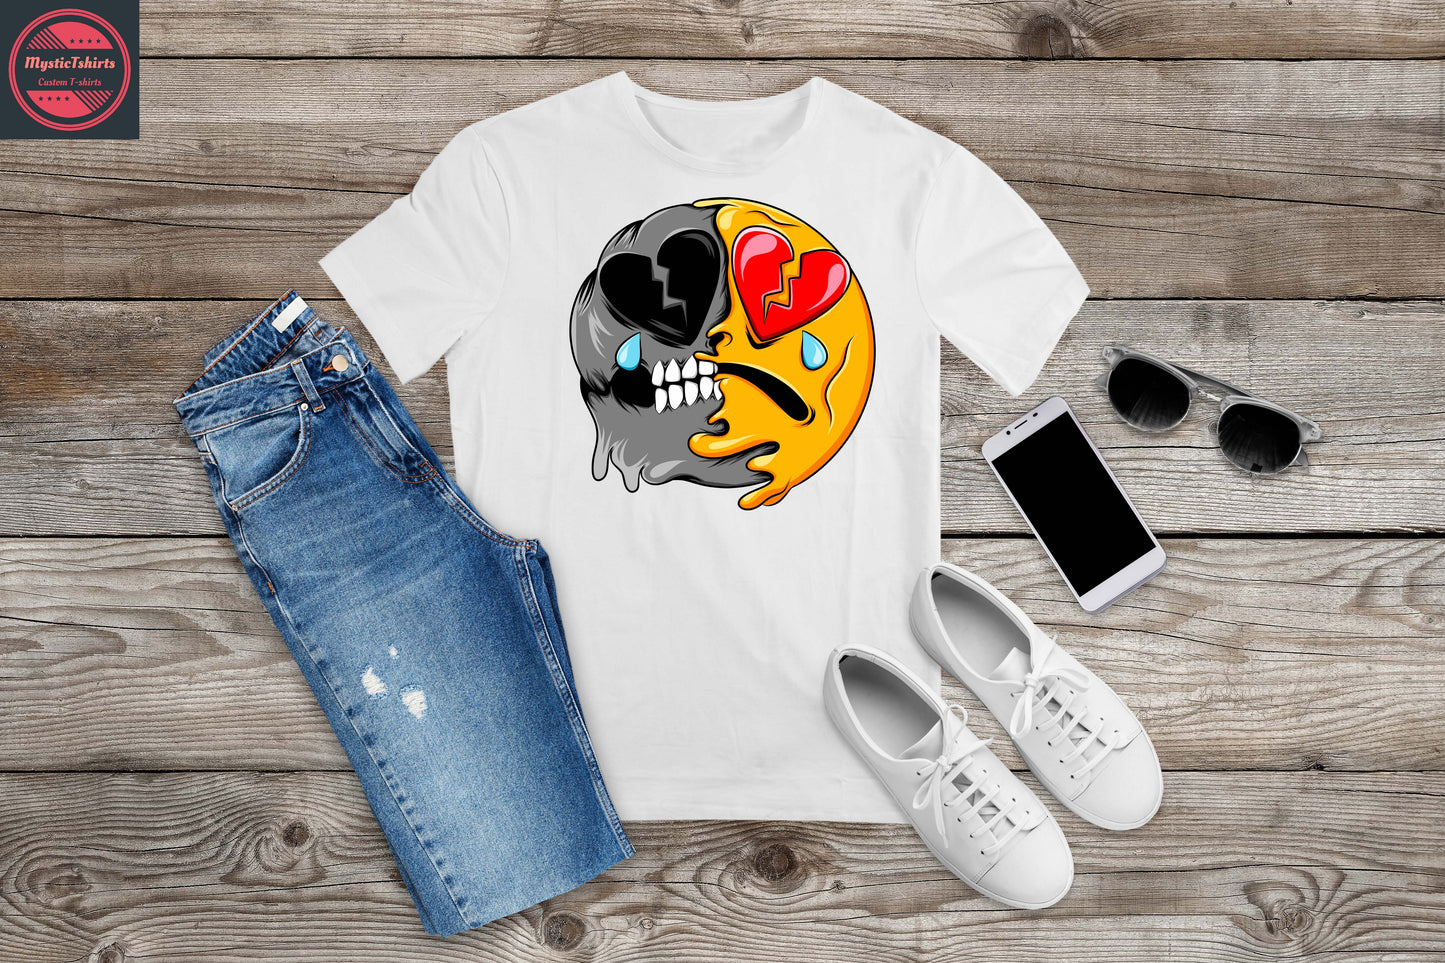 107. CRAZY FACE, Personalized T-Shirt, Custom Text, Make Your Own Shirt, Custom Tee